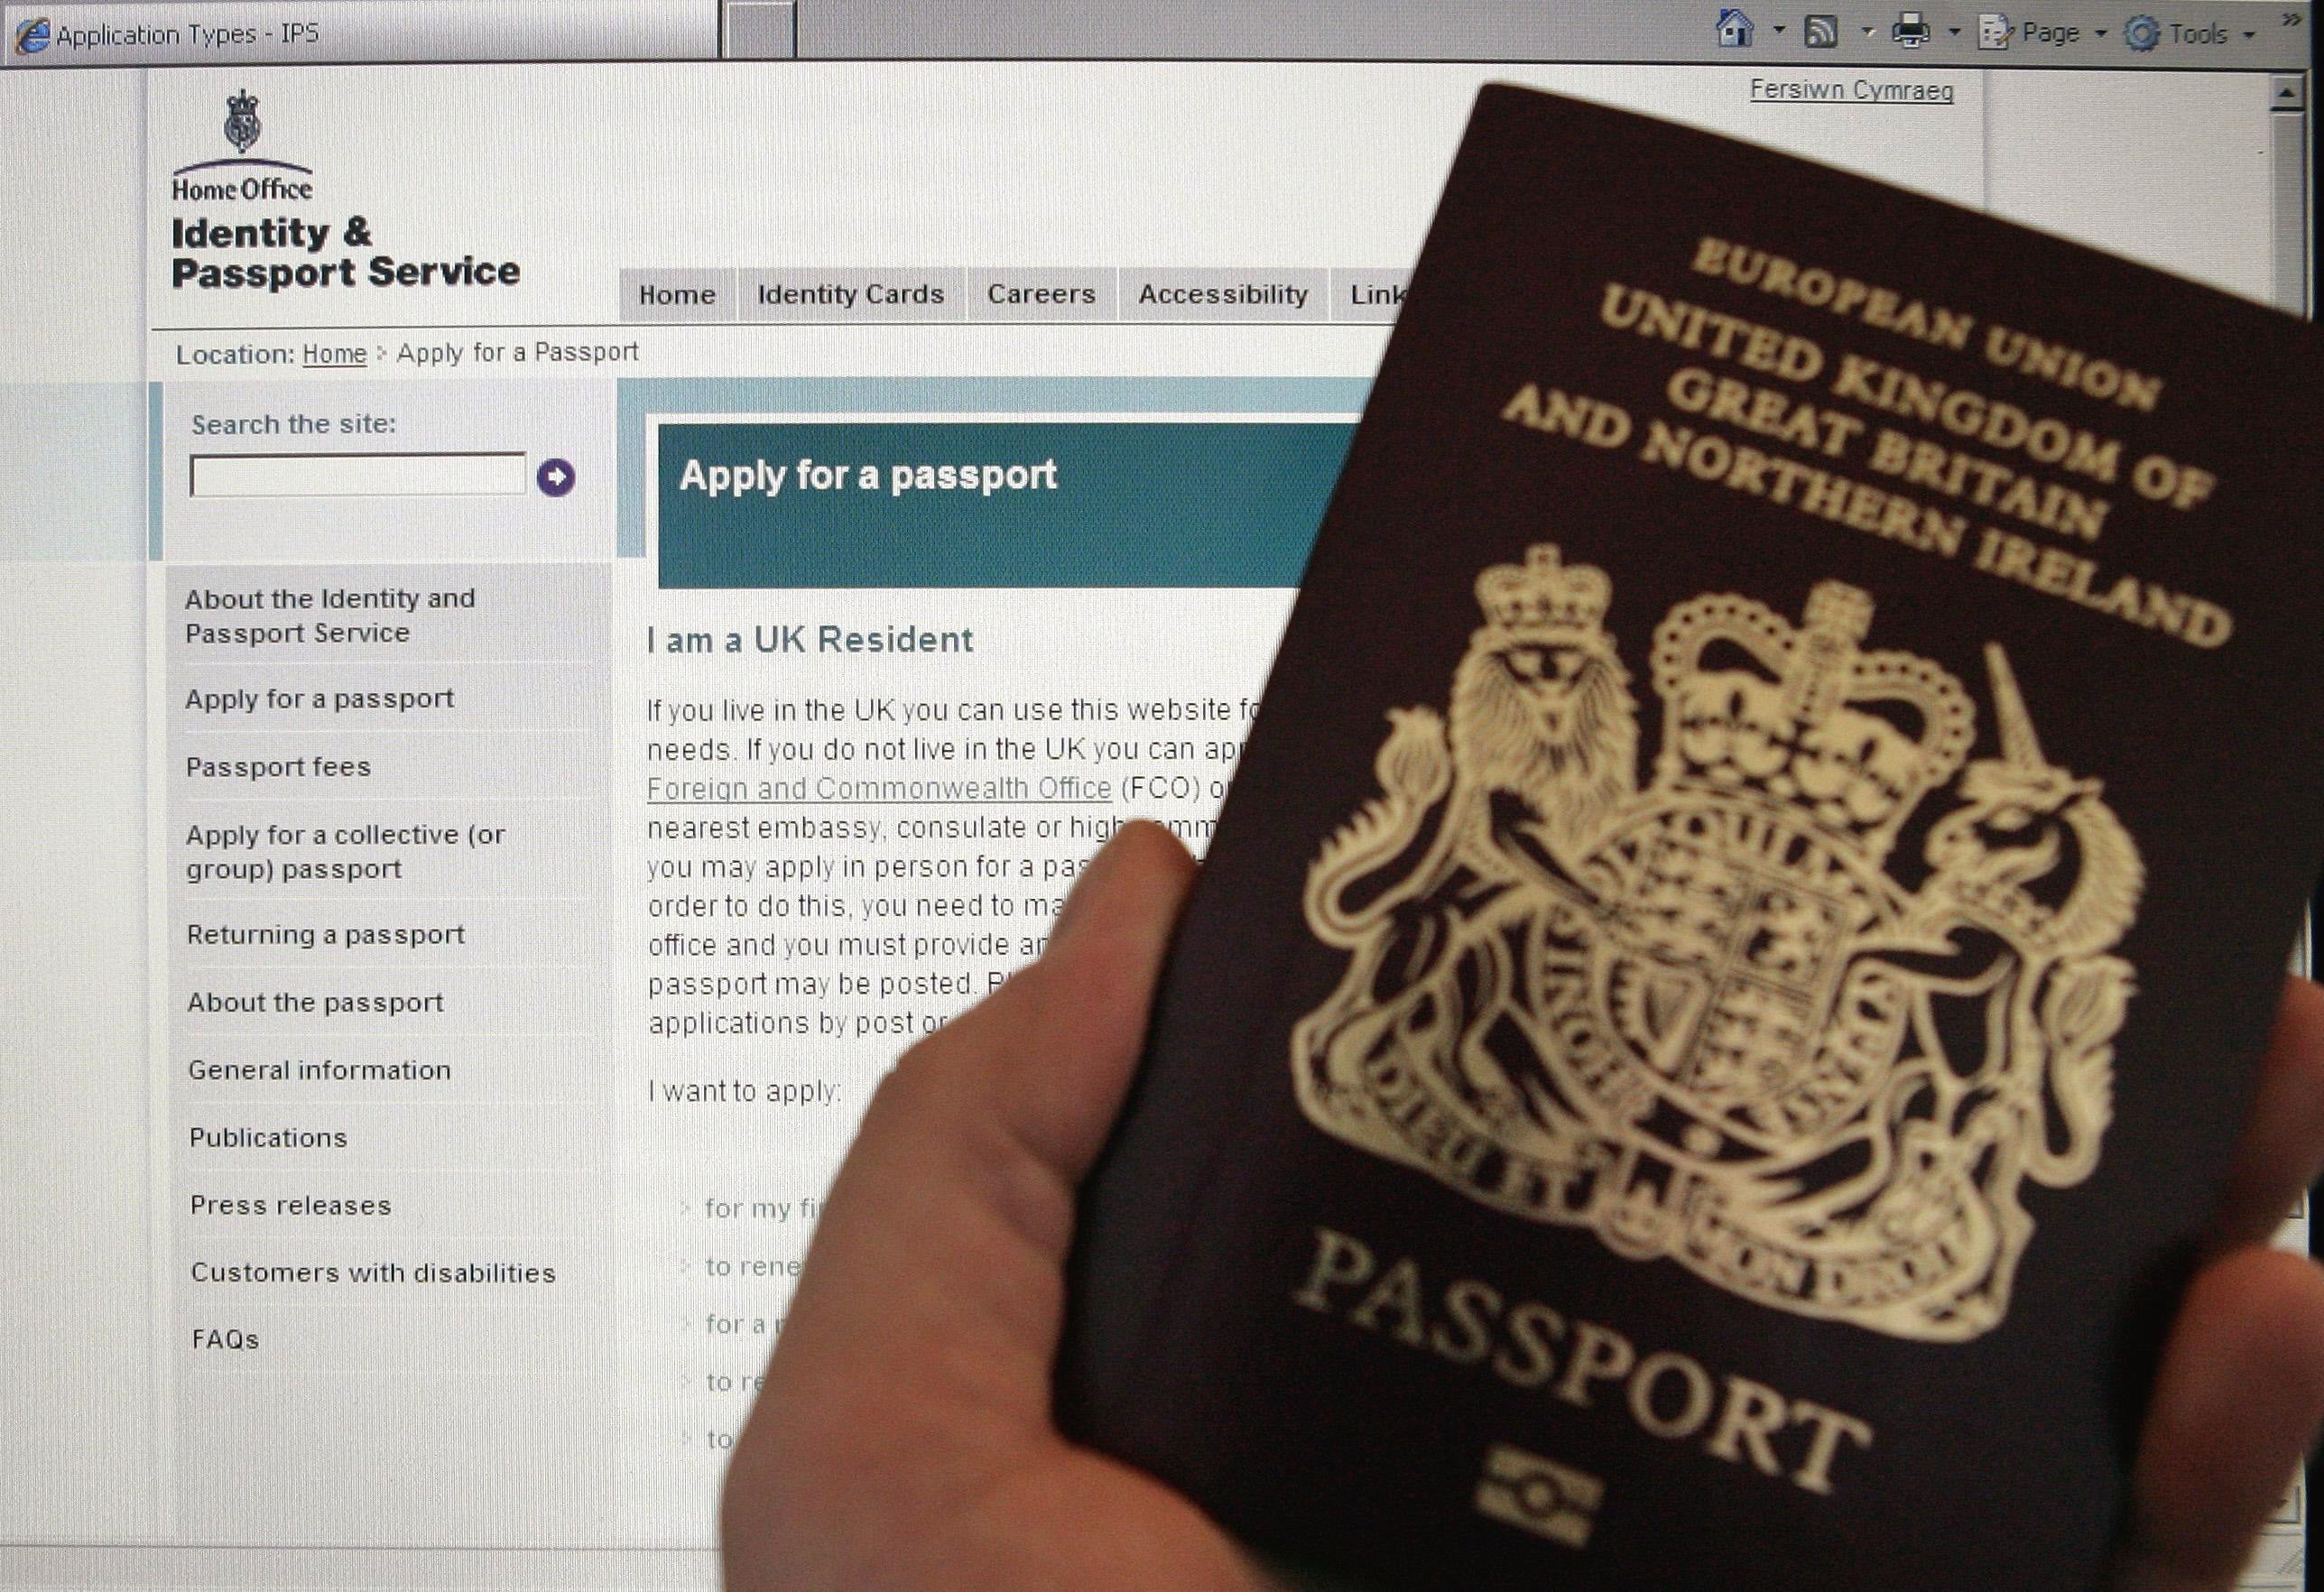 Those hoping to travel abroad have been warned to renew their passports ‘as soon as possible’